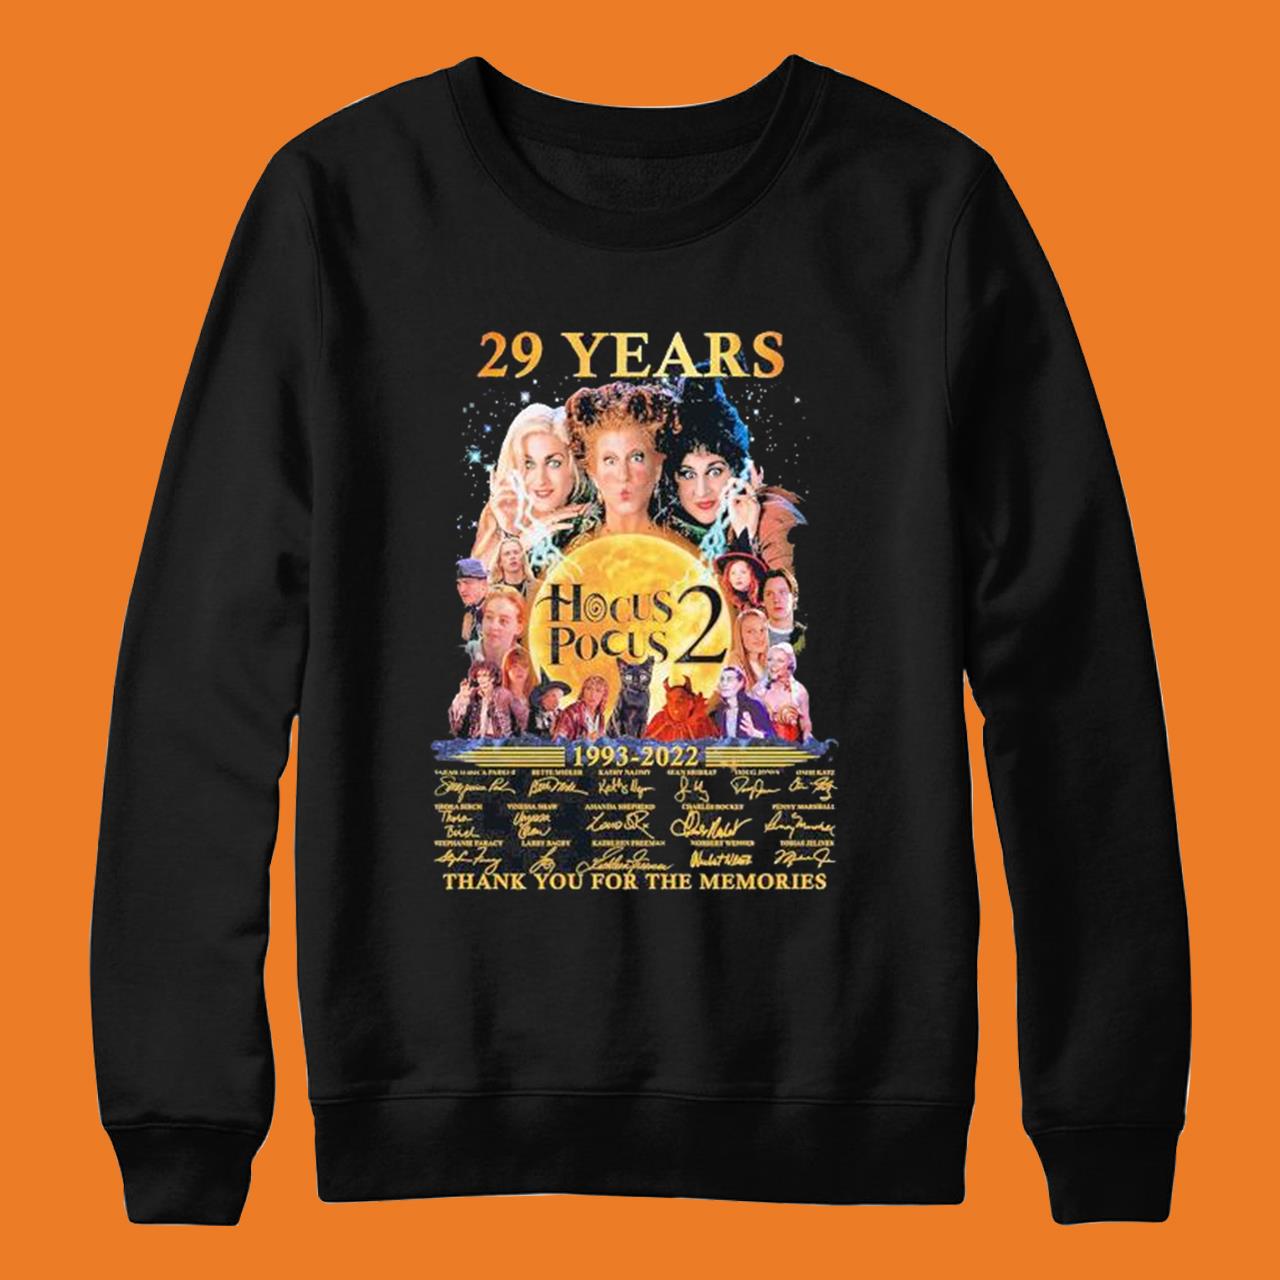 29 Years Hocus Pocus 2 1993-2022 Thank You For The Memories Signatures Shirt